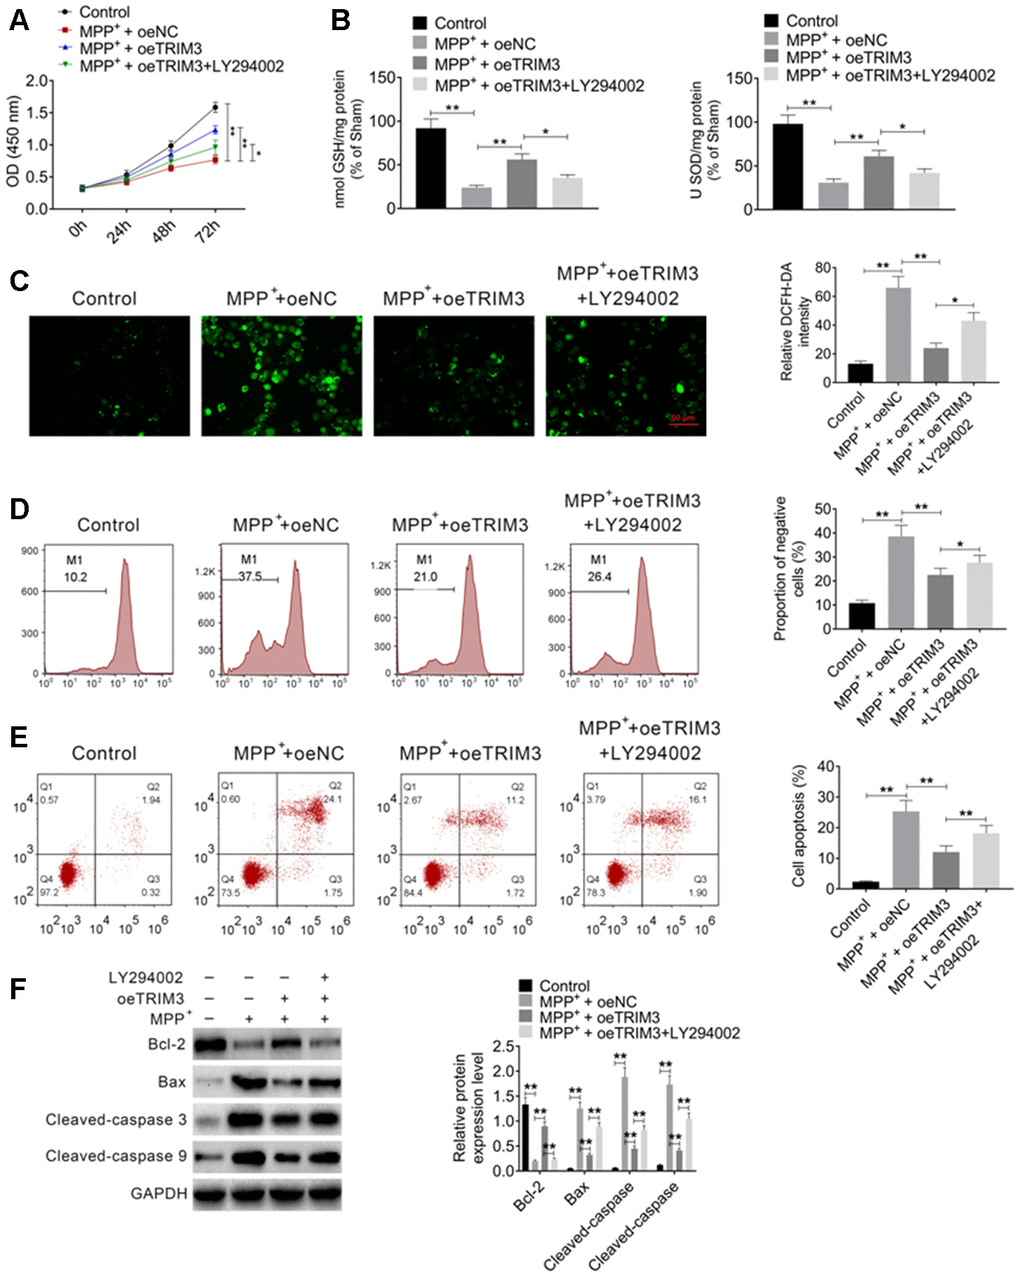 PI3K inhibitor treatment reversed the inhibitory effect of TRIM3 overexpression on PD cells apoptosis. (A) PI3K inhibitor treatment reversed the promoting effect of TRIM3 overexpression on PD cells proliferation. (B) PI3K inhibitor treatment reversed the promoting effect of TRIM3 overexpression on GSH and SOD secretion in PD cells. (C) PI3K inhibitor treatment reversed the inhibitory effect of TRIM3 overexpression on ROS level in PD cells. (D) PI3K inhibitor treatment reversed the inhibitory effect of TRIM3 overexpression on the MMP of PD cells. (E) PI3K inhibitor treatment reversed the inhibitory effect of TRIM3 overexpression on PD cells apoptosis. (F) PI3K inhibitor treatment reversed the effected of TRIM3 overexpression on apoptosis-related proteins expression in PD cells. * P P 